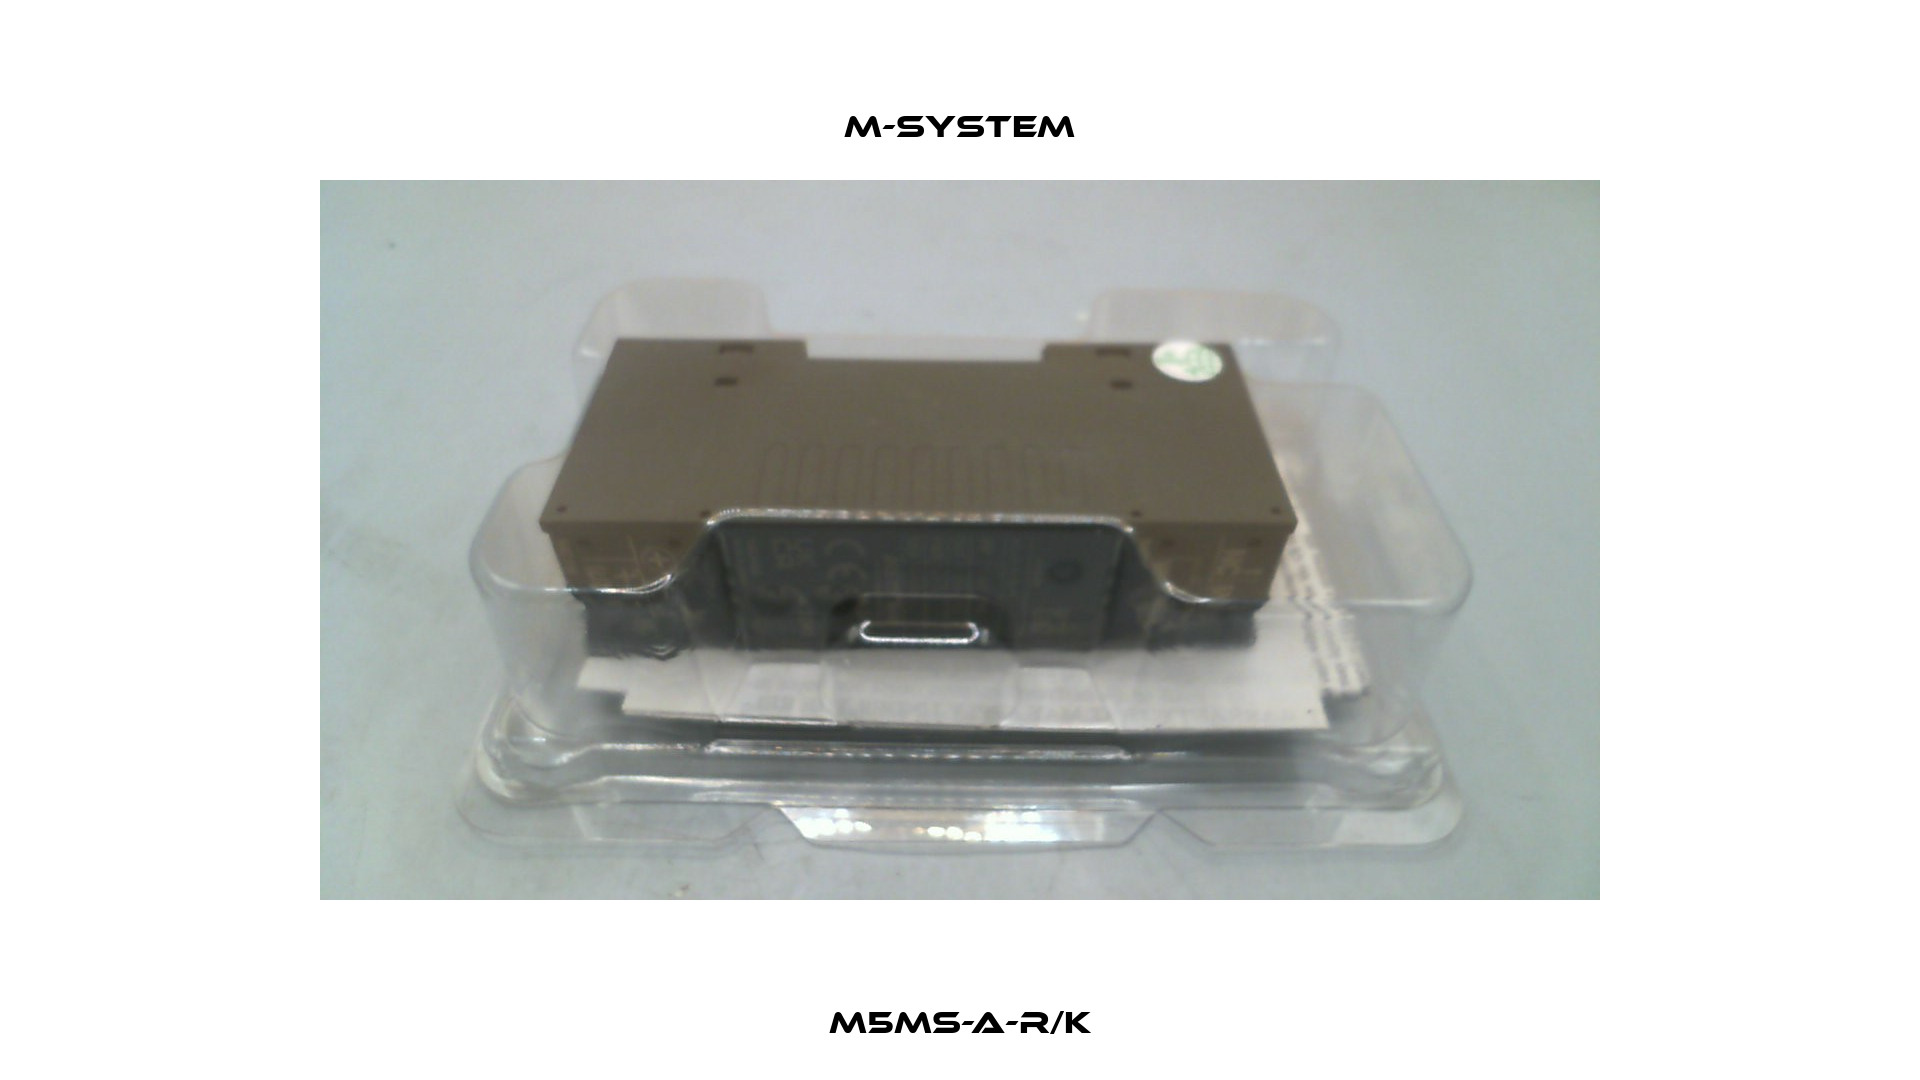 M5MS-A-R/K M-SYSTEM